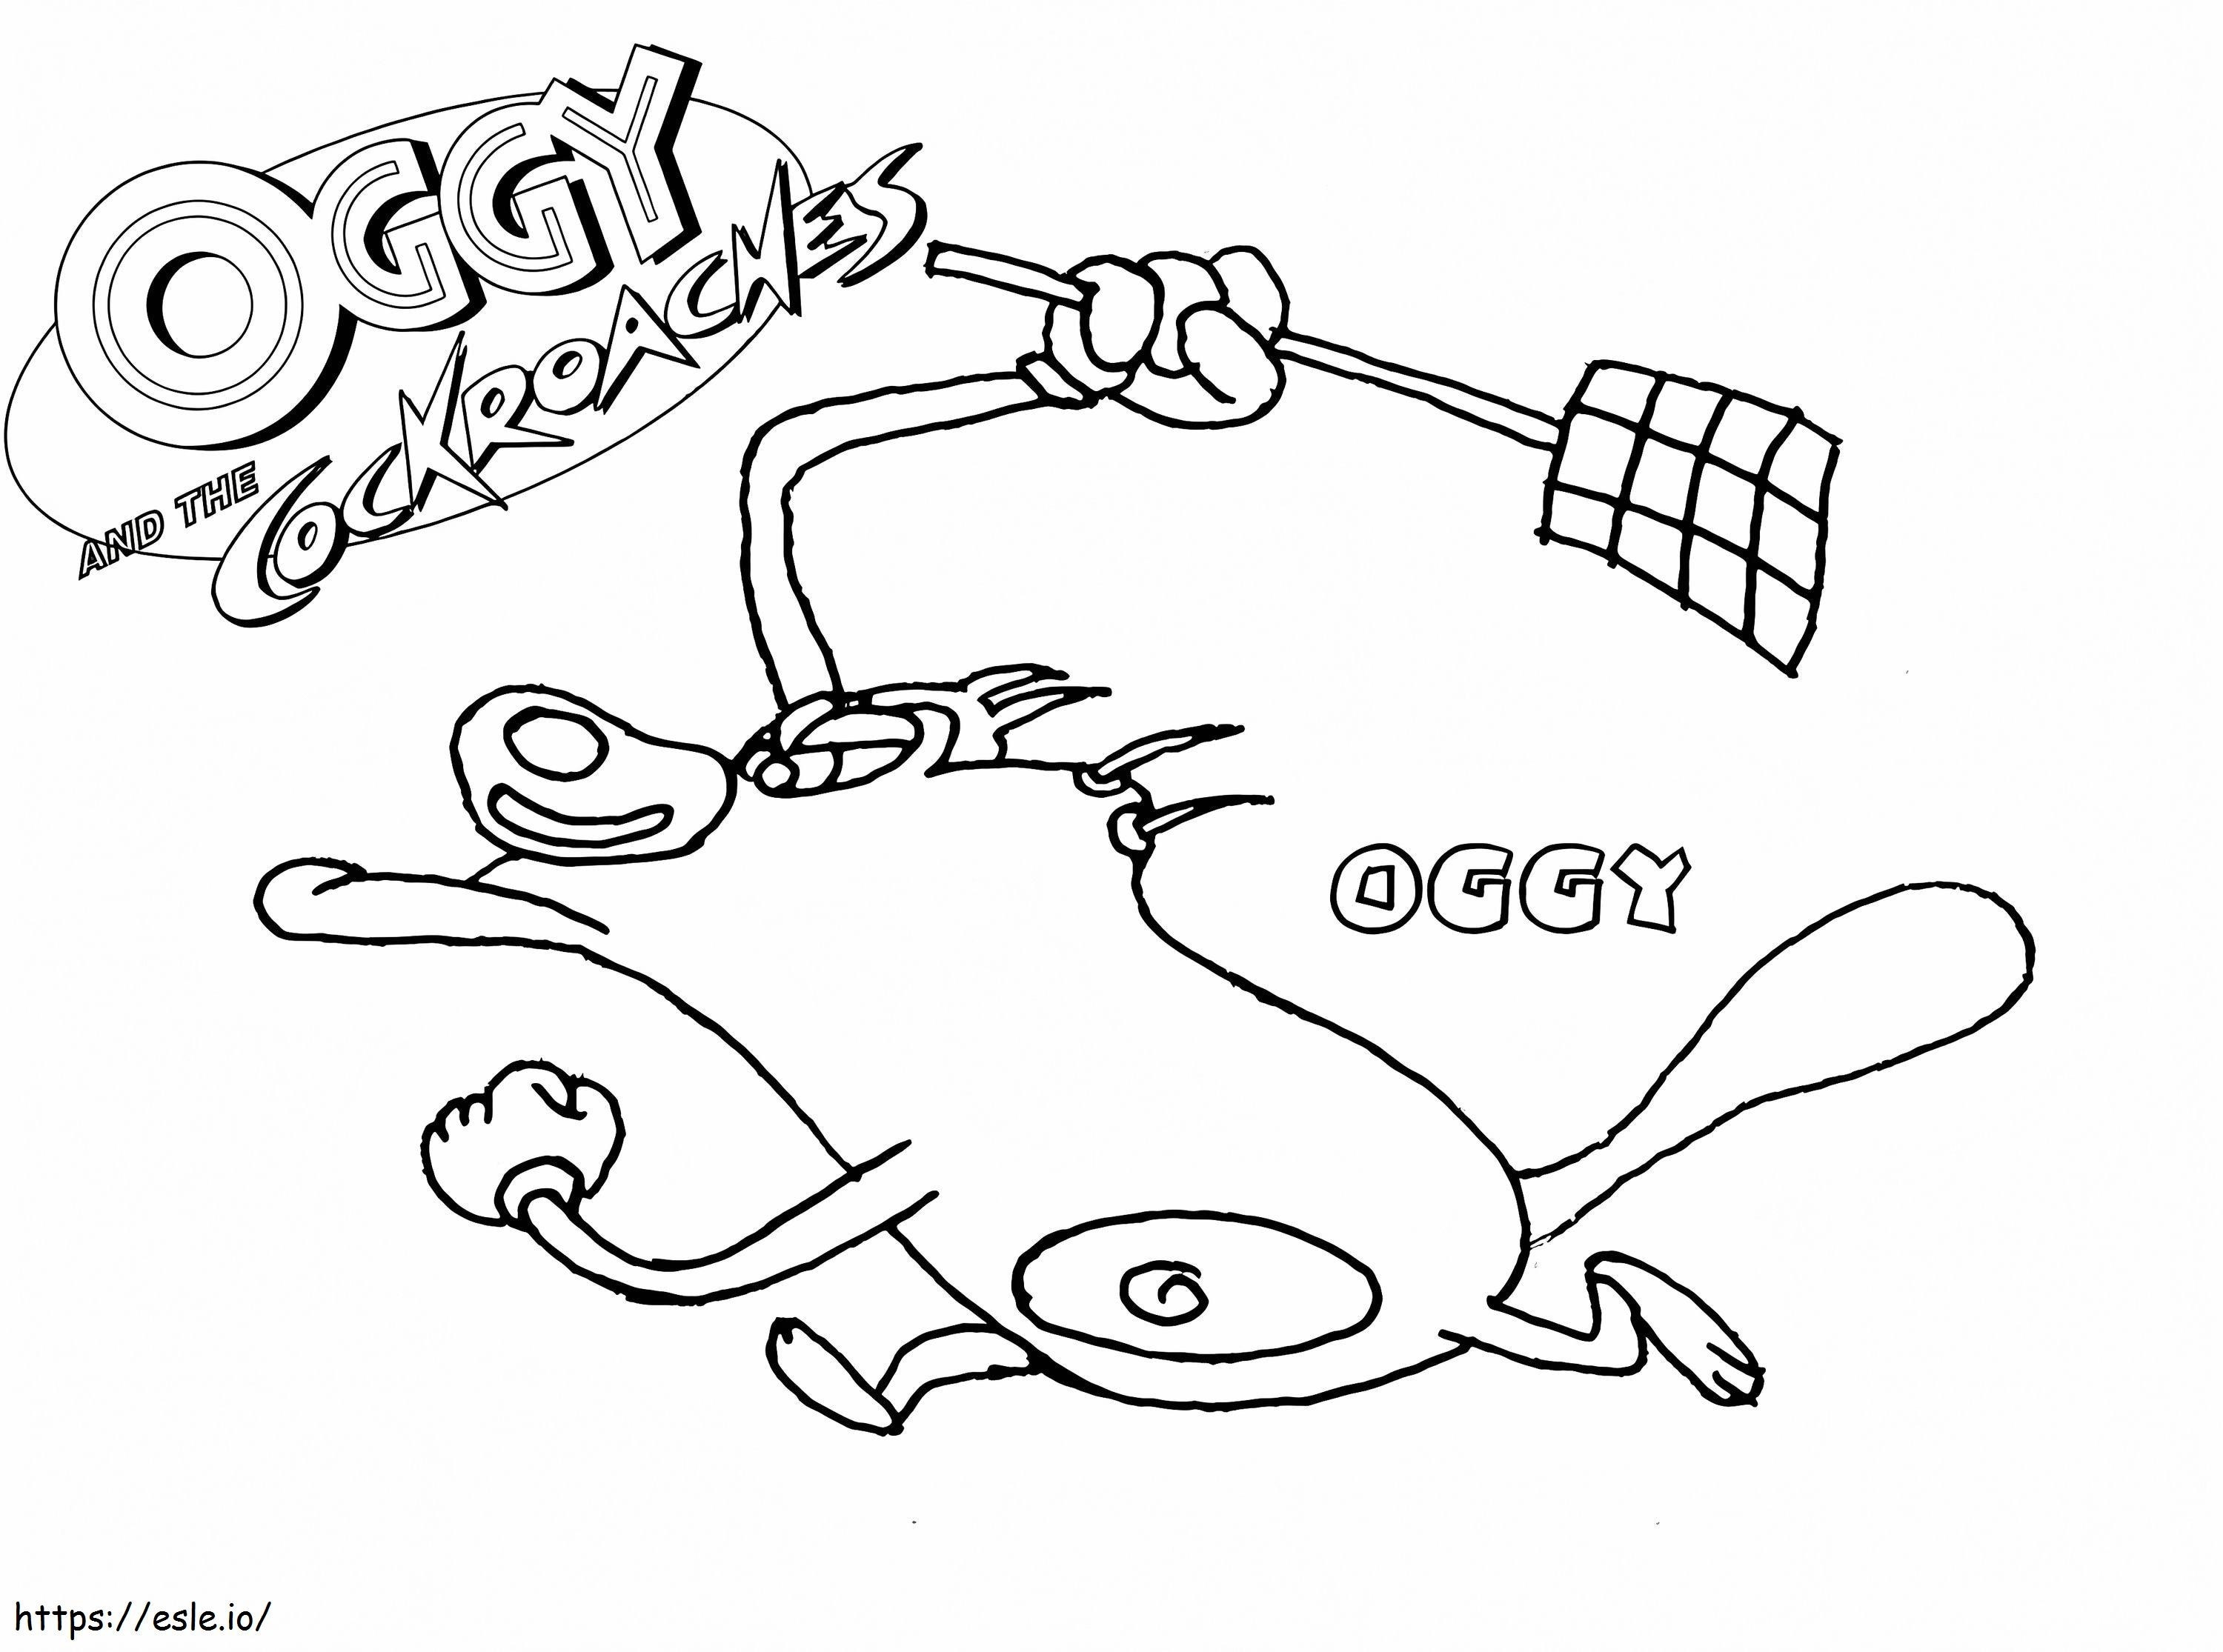 1594947890 3515 101138 Oggy Cockroaches2 coloring page